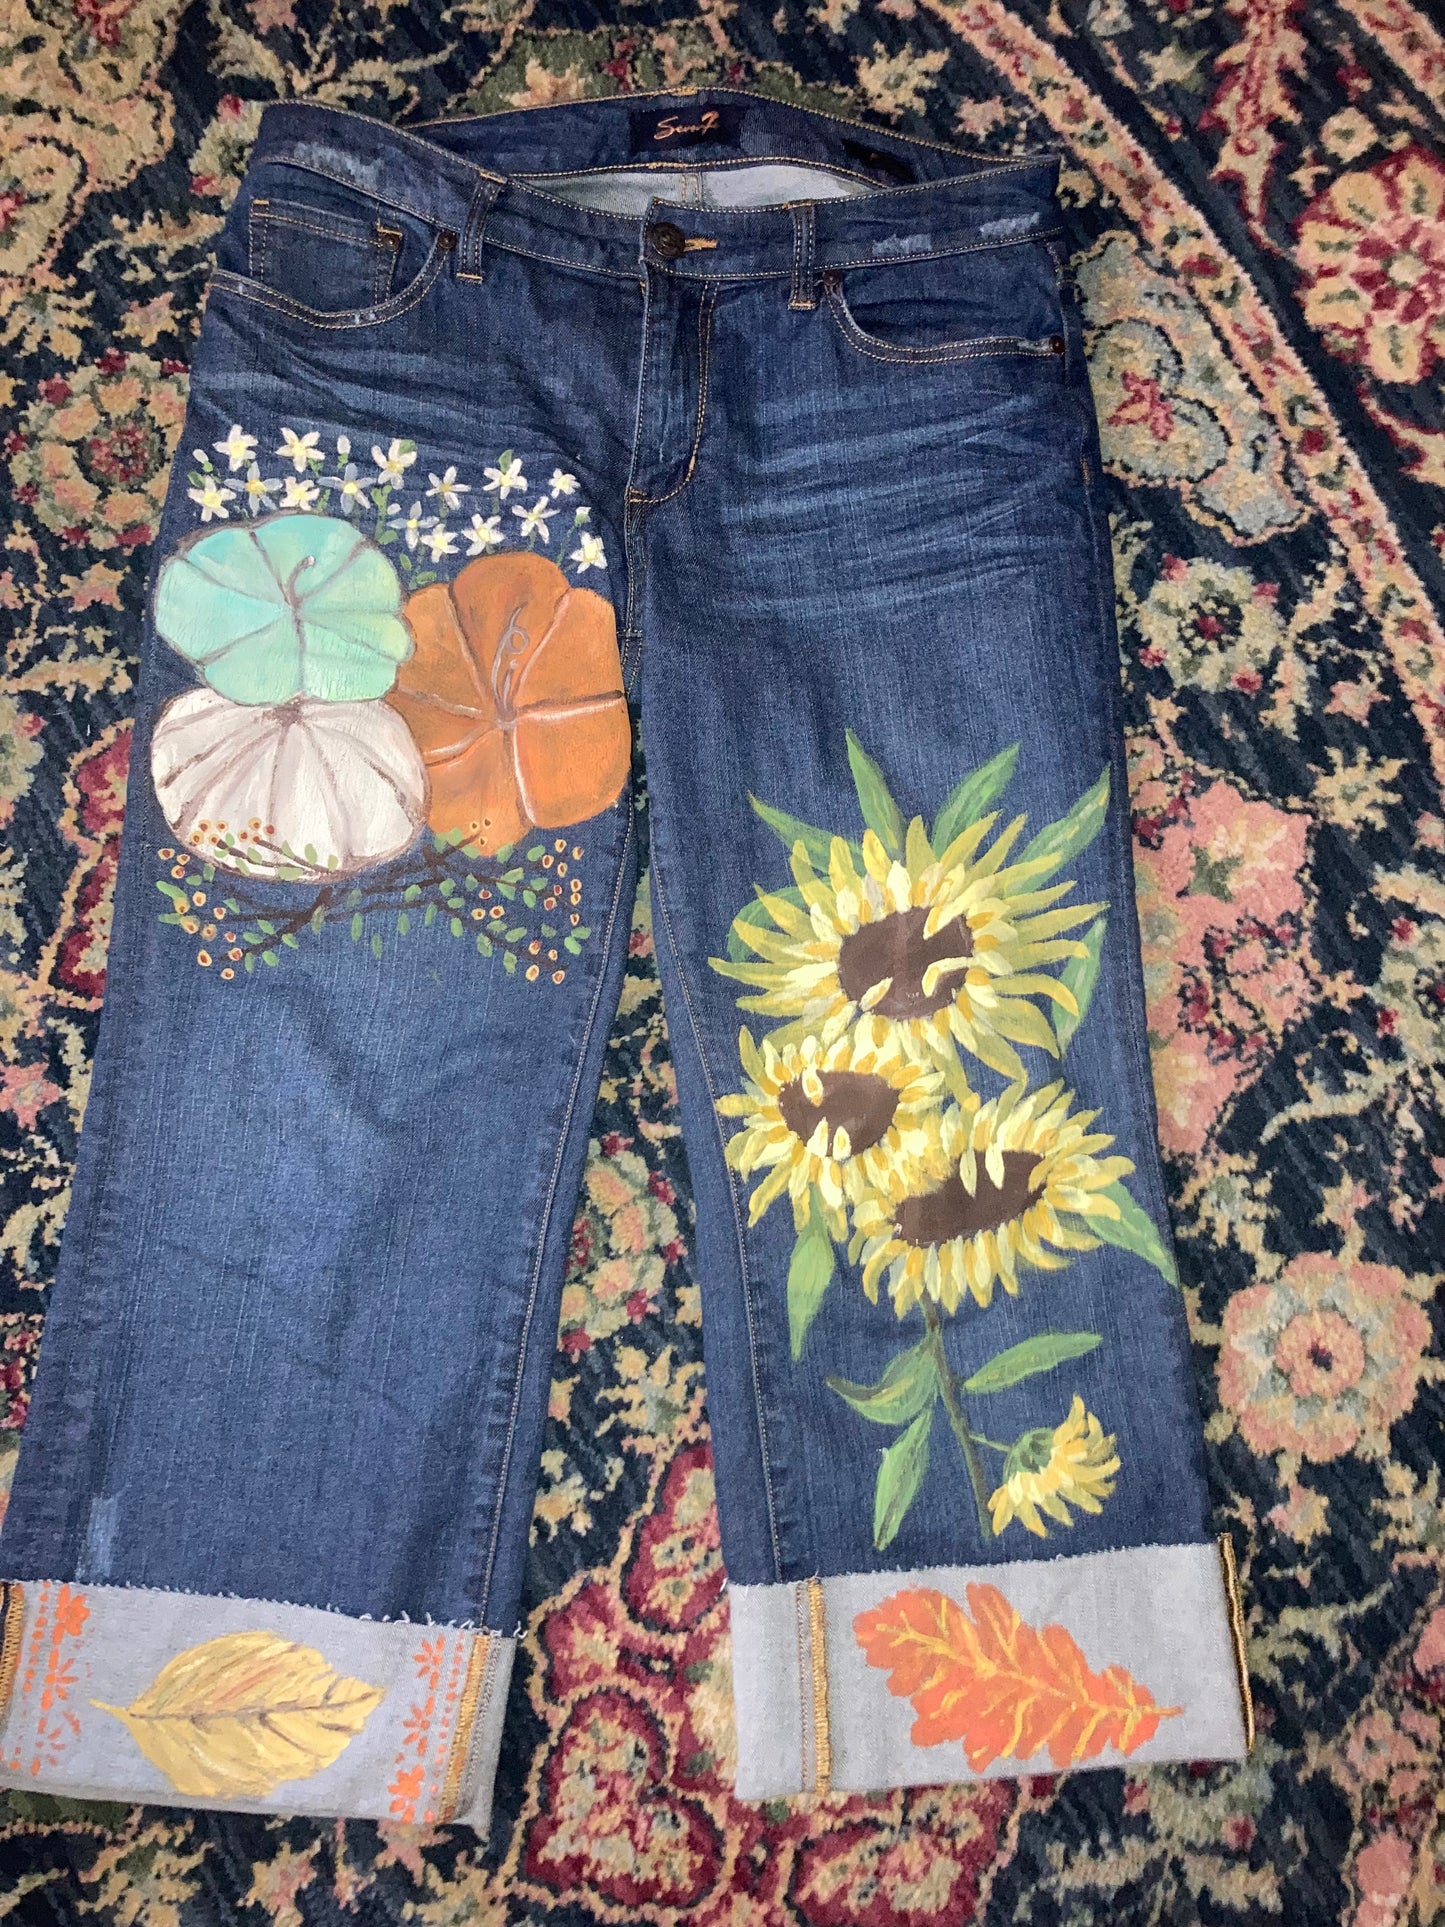 Fall Y’all Pumpkins Sunflower painted jeans